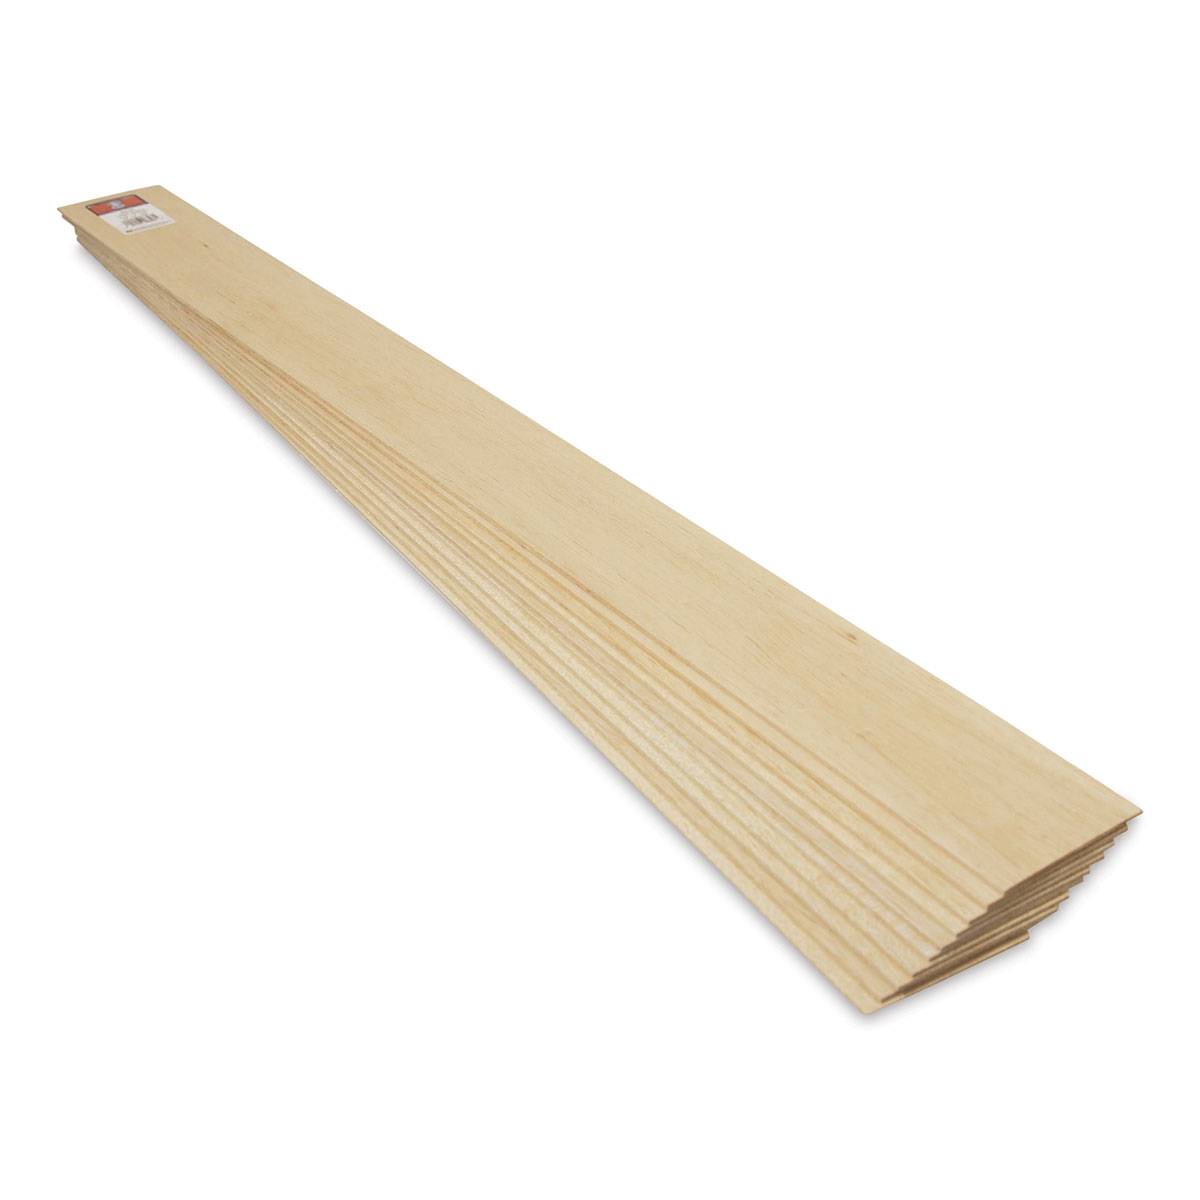 MIDWEST PRODUCTS 6301 BALSA WOOD SHEET 1/32X3X36 